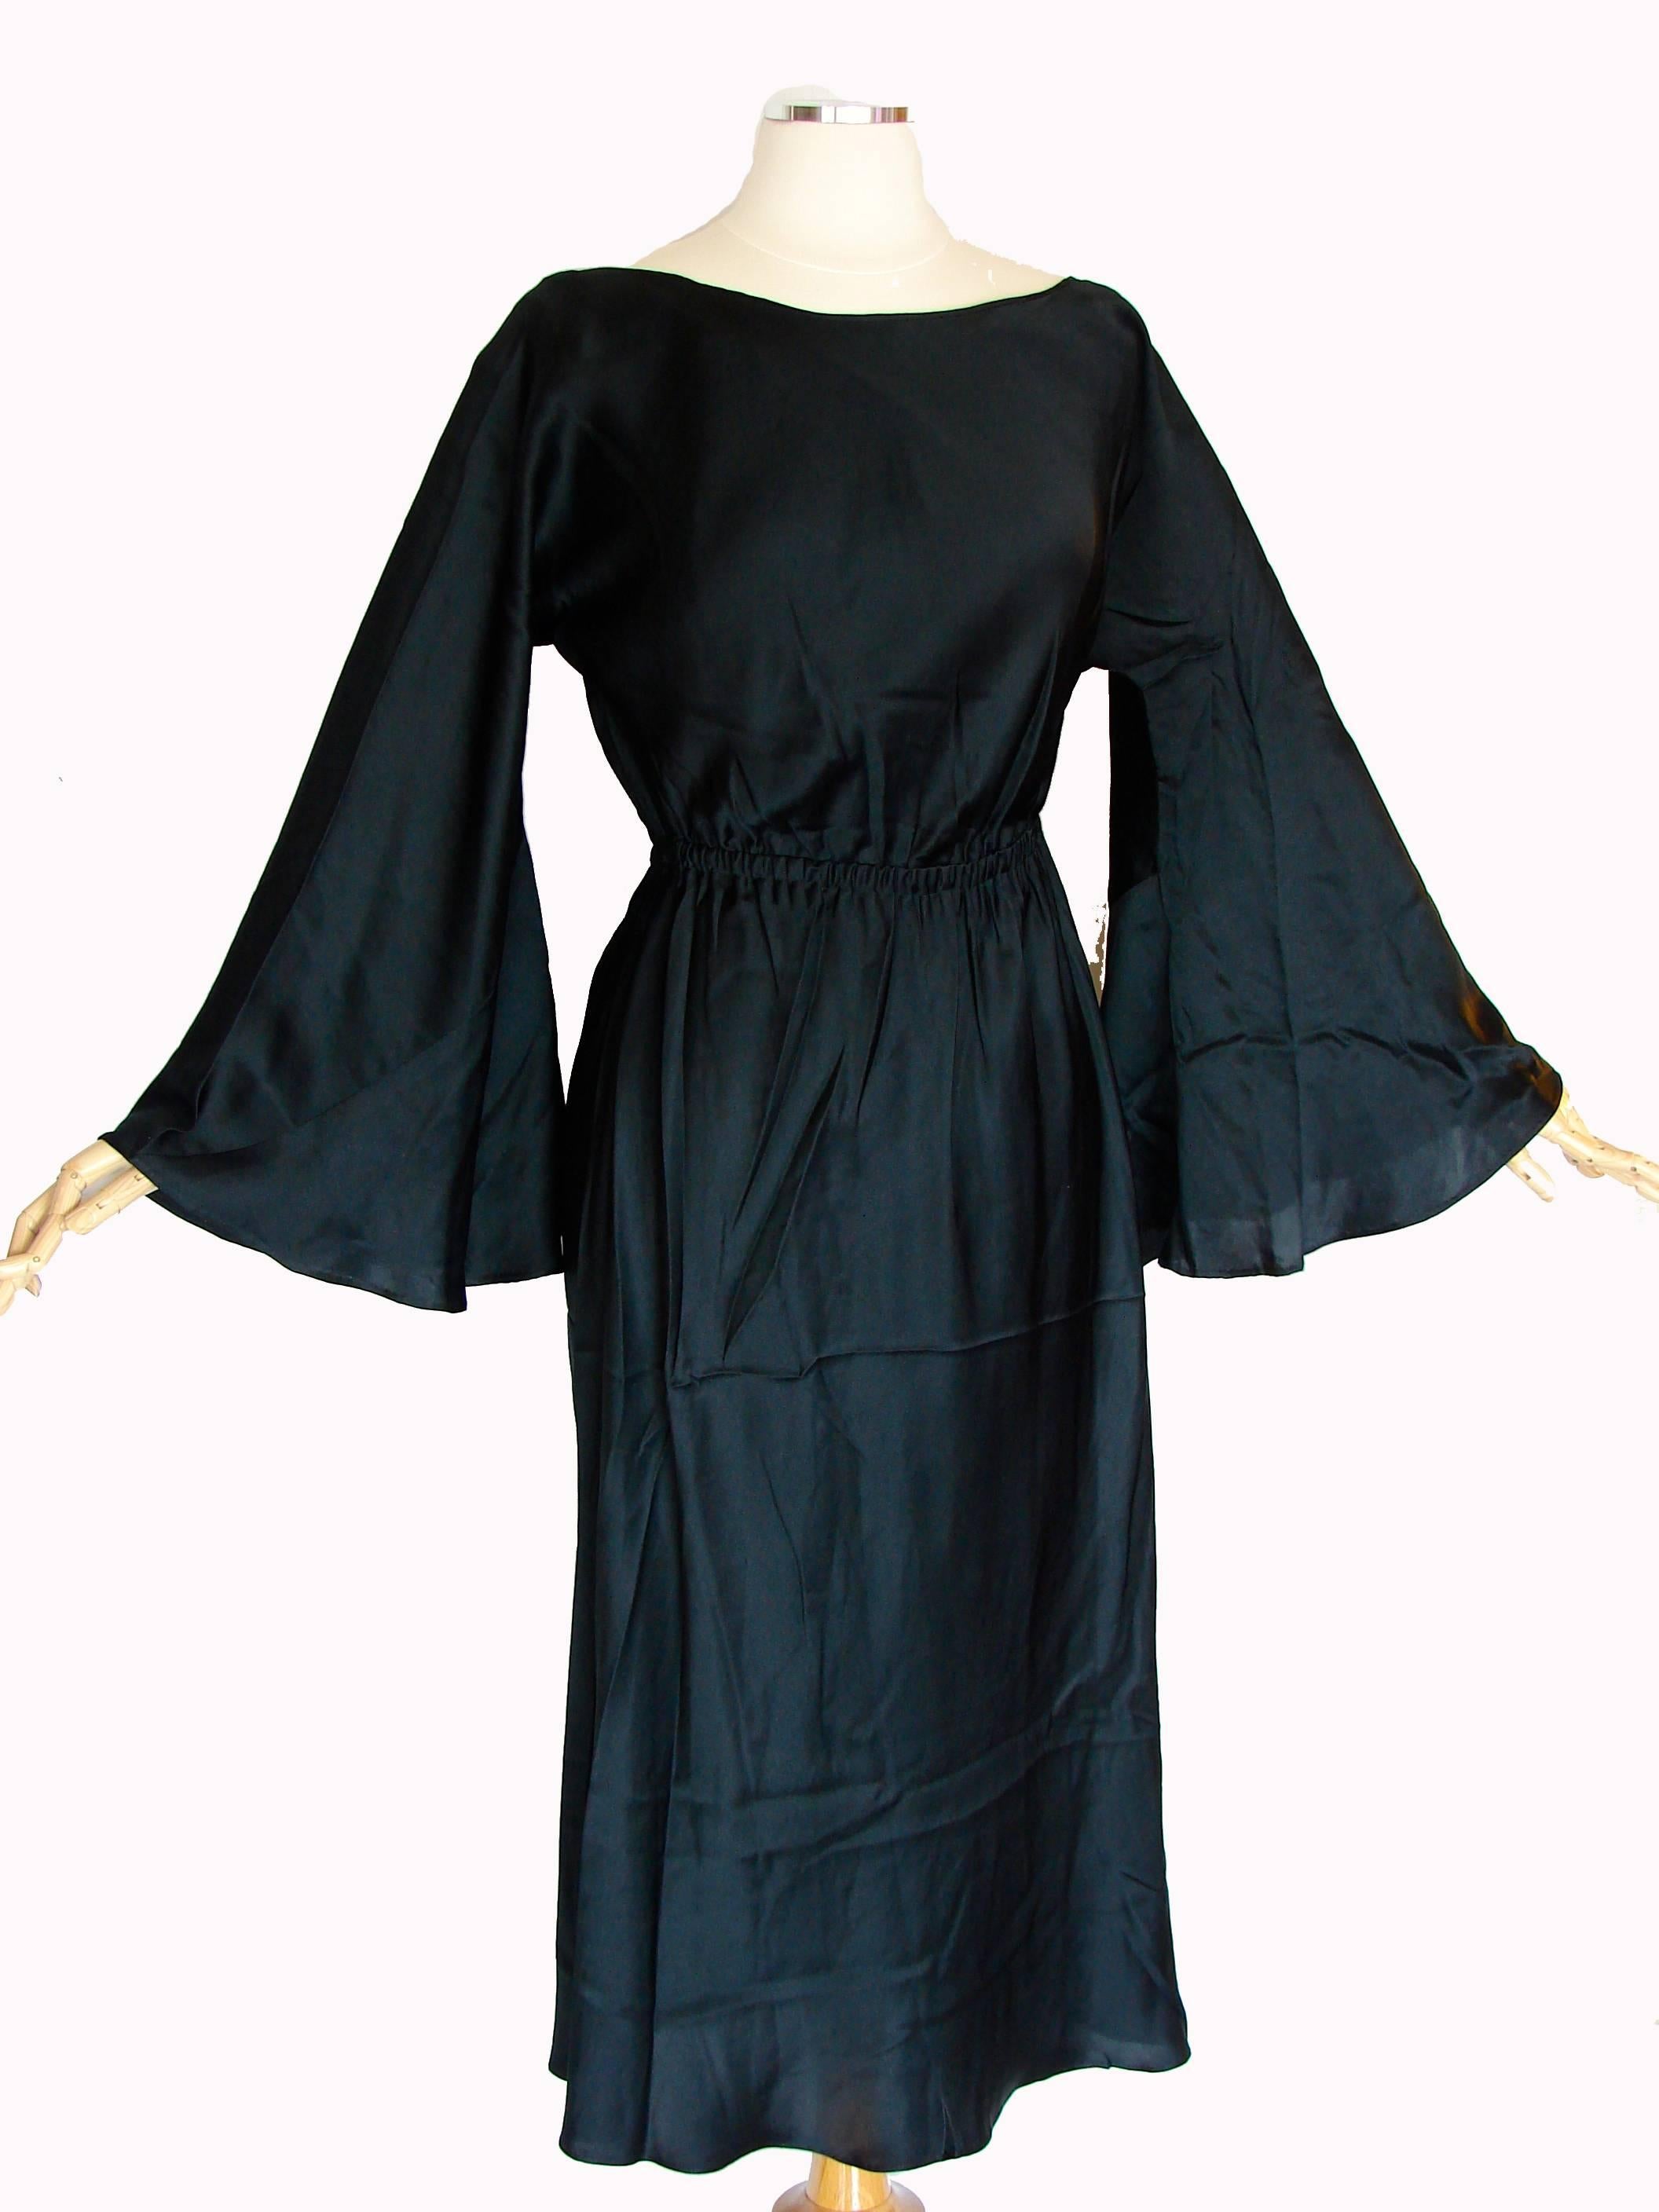 Women's 70s Halston Black Cocktail Dress with Low Back Bell Sleeves Silk Carmeuse Sz M